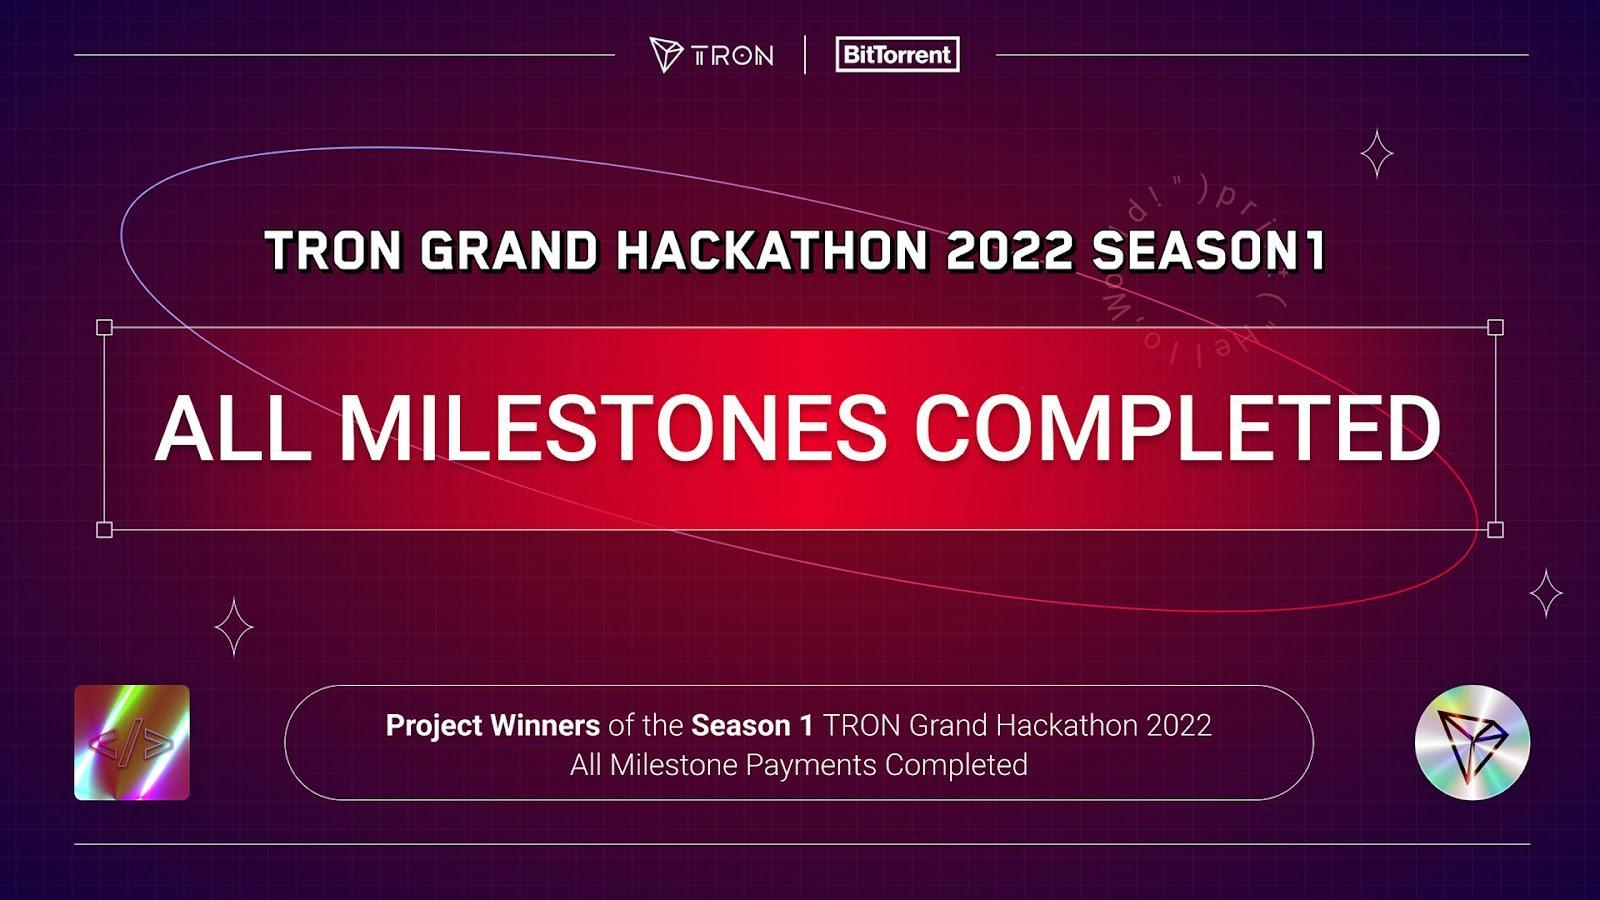 Project Winners of the TRON Grand Hackathon 2022 Season 1 Milestone Payments Completed